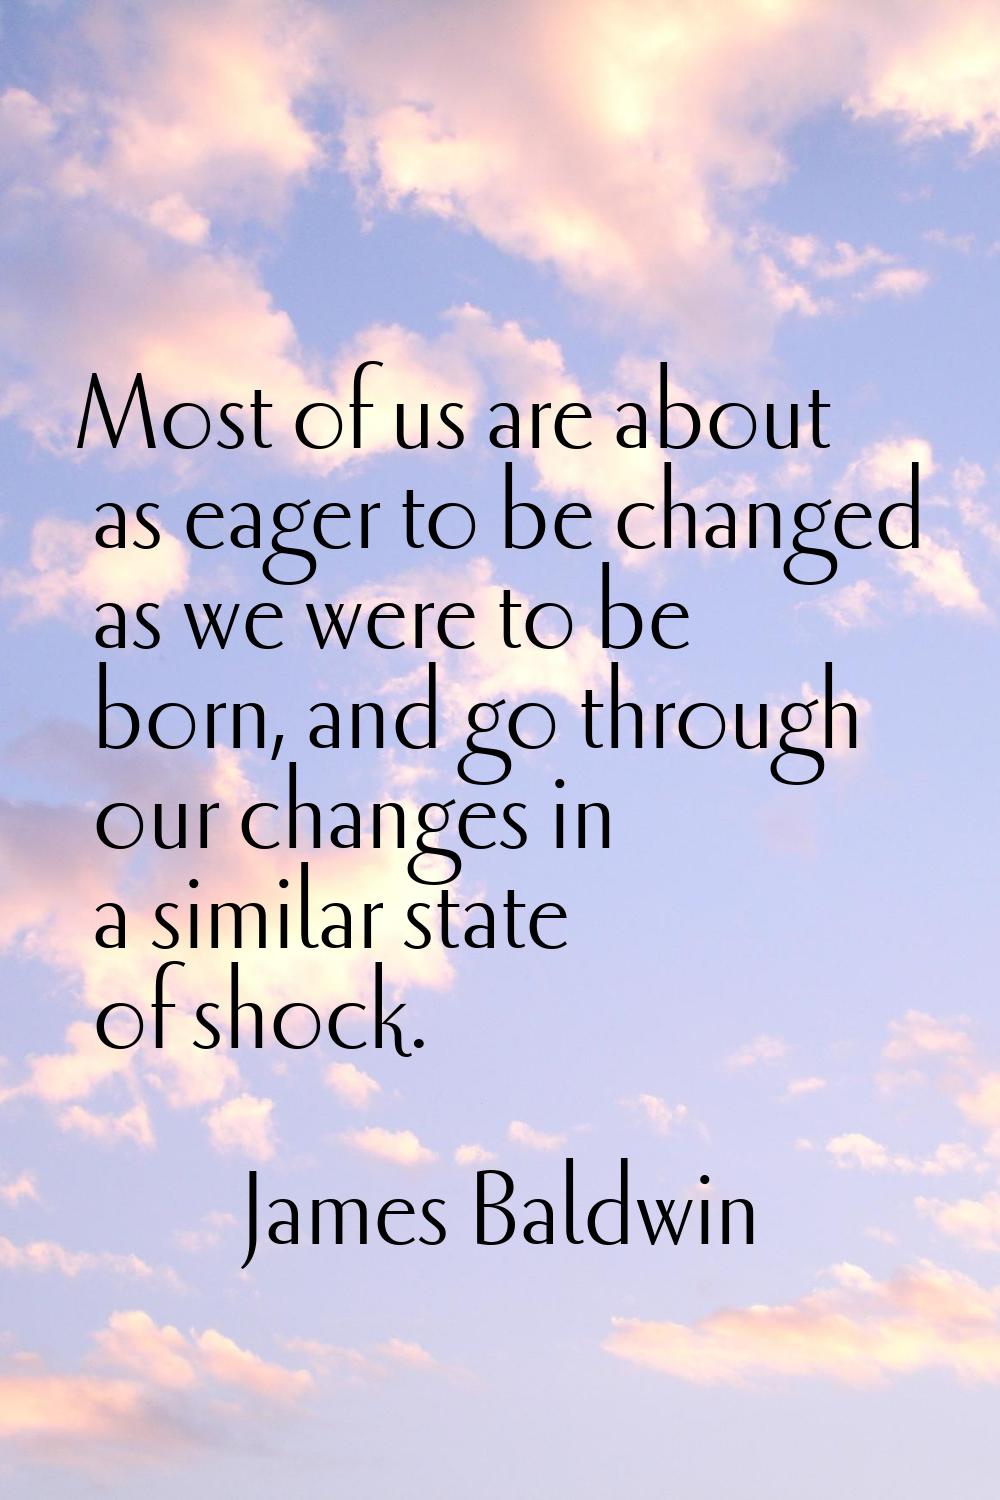 Most of us are about as eager to be changed as we were to be born, and go through our changes in a 